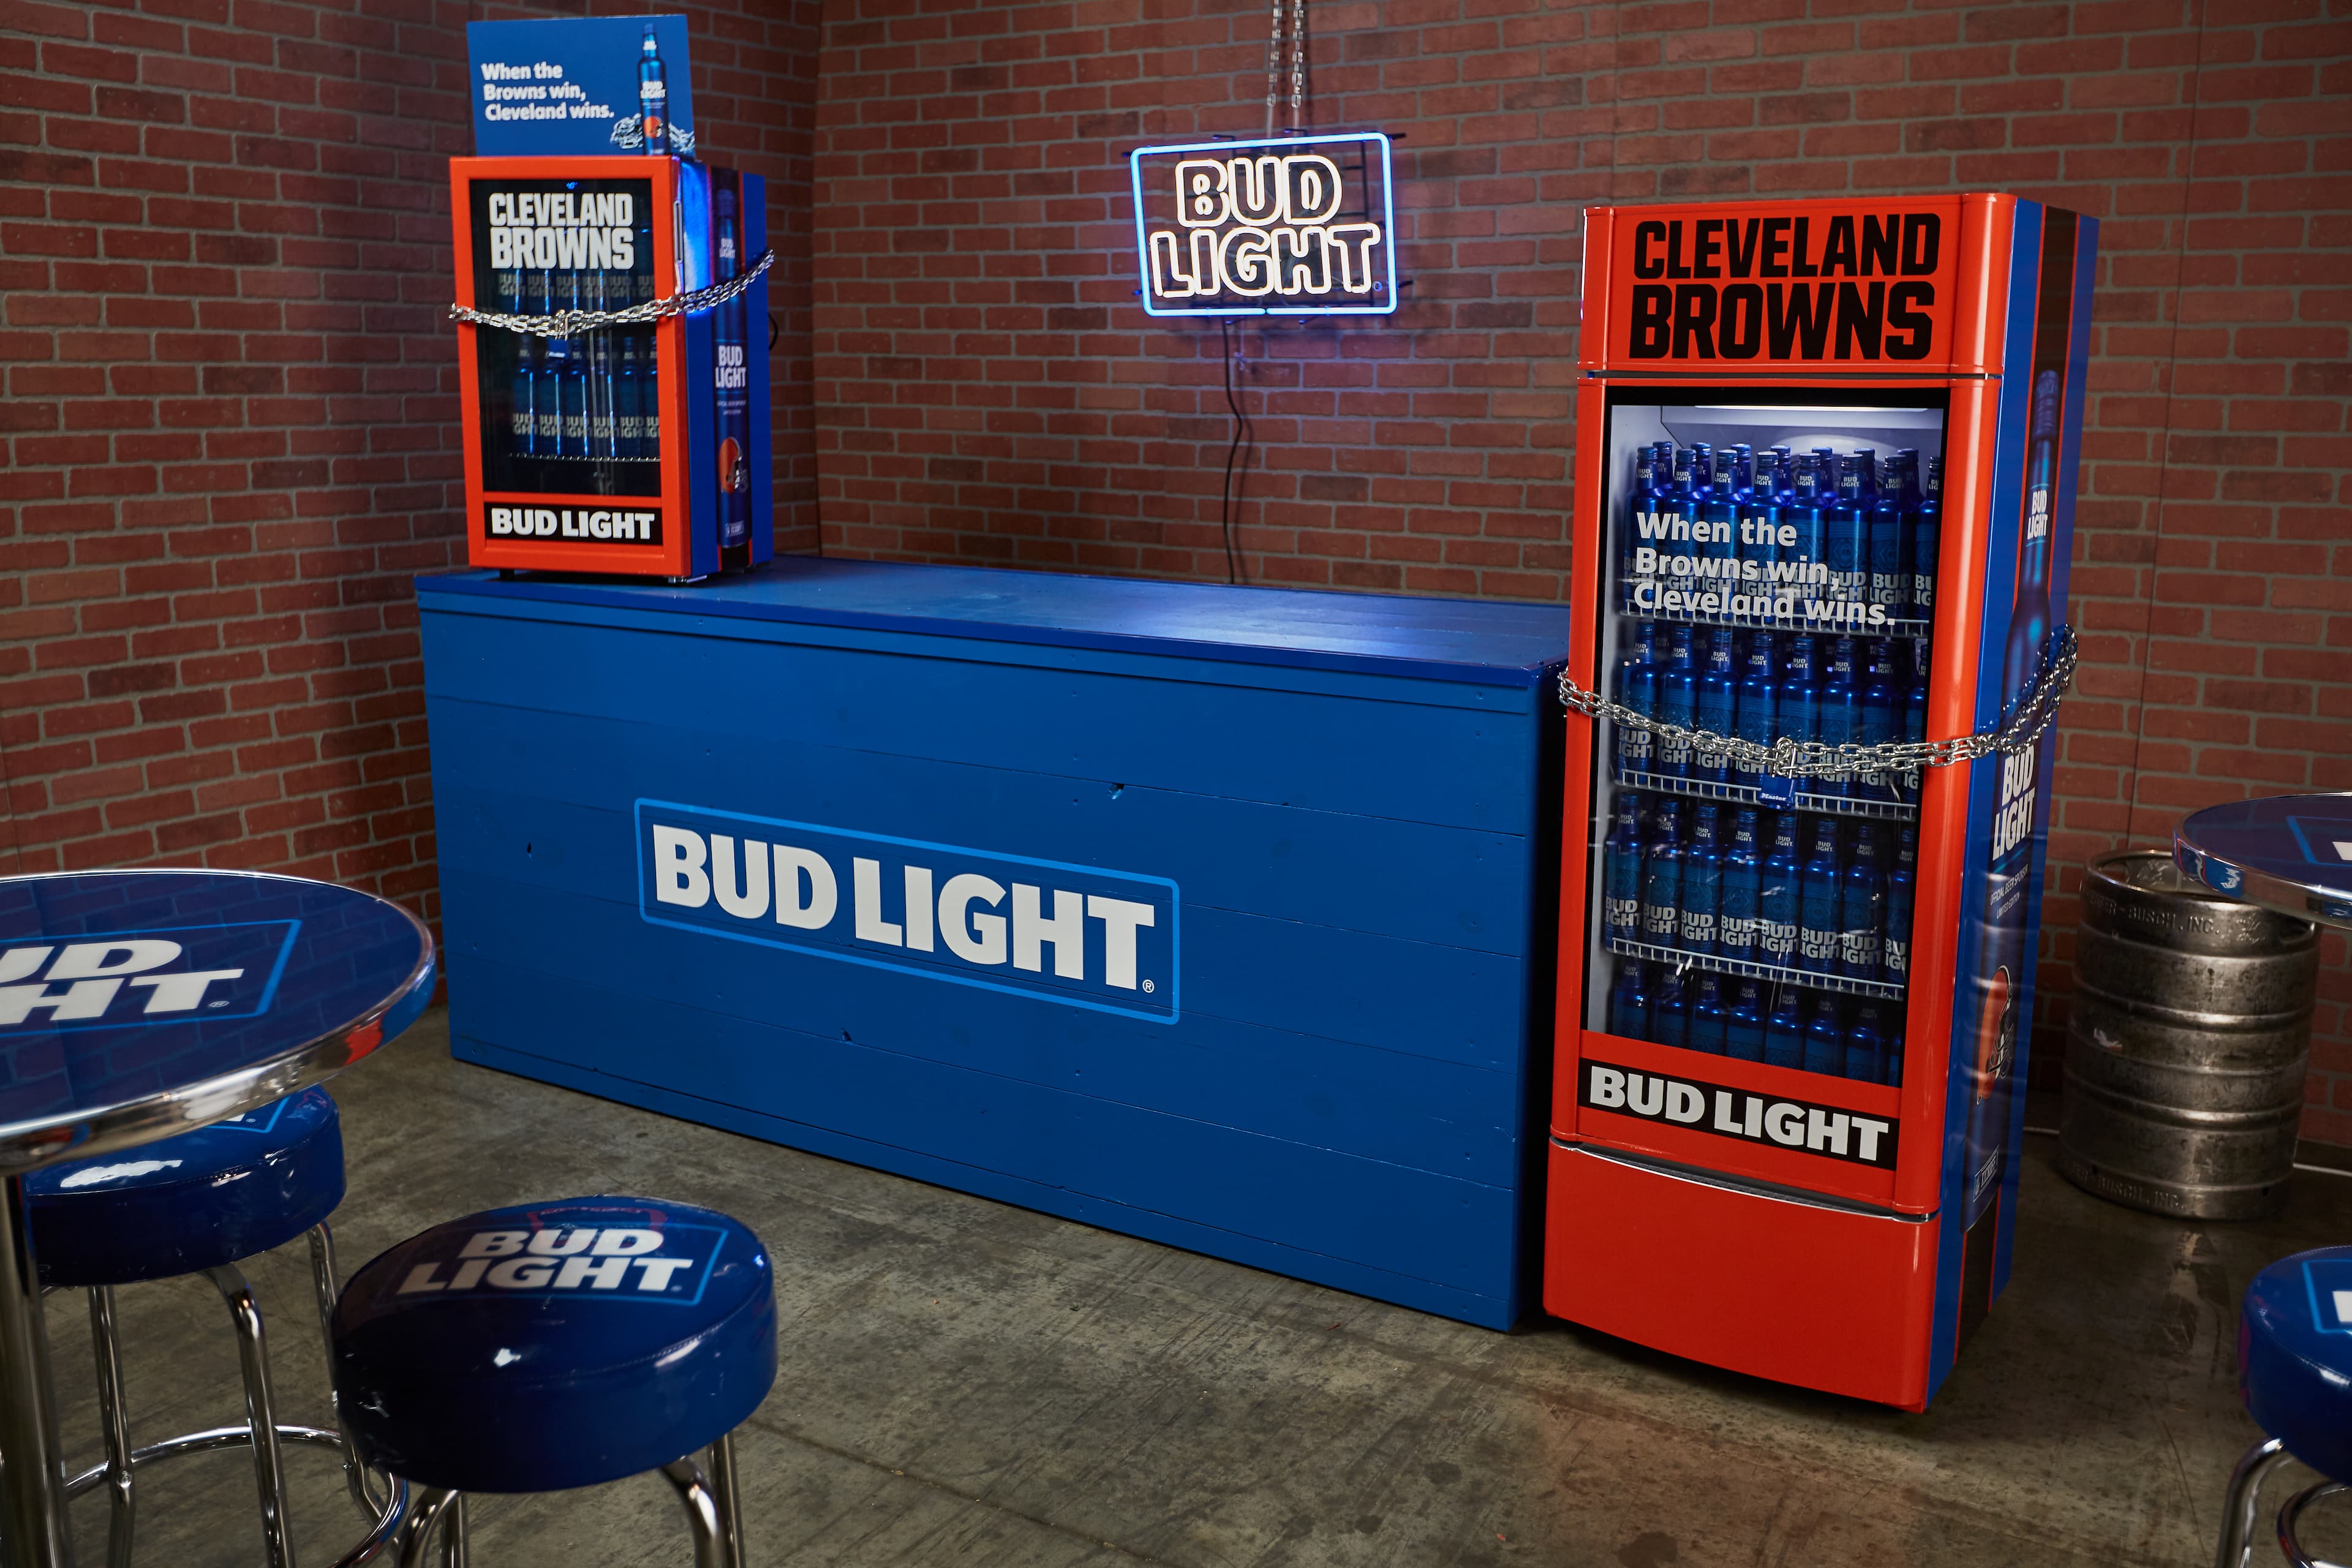 Bud light campaign picture